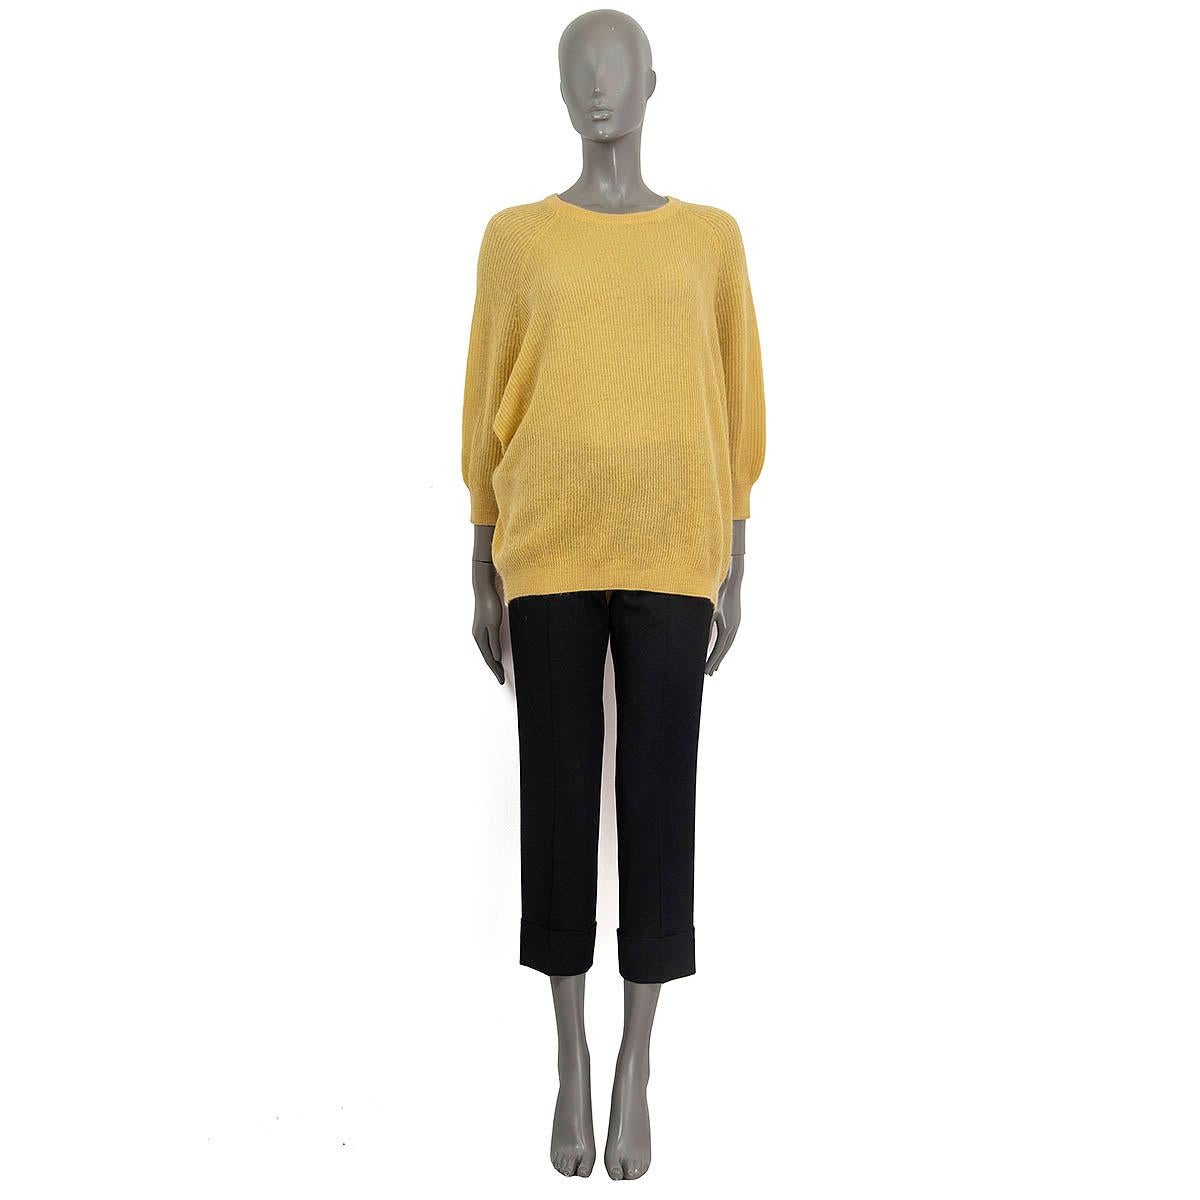 100% authentic Brunello Cucinelli knit sweater in yellow polyamide (47%), mohair (37%) and wool (16%). Features 3/4 raglan sleeves. Unlined. Has been worn and is in excellent condition. 

Measurements
Tag Size	M
Size	M
Bust	77cm (30in) to 180cm